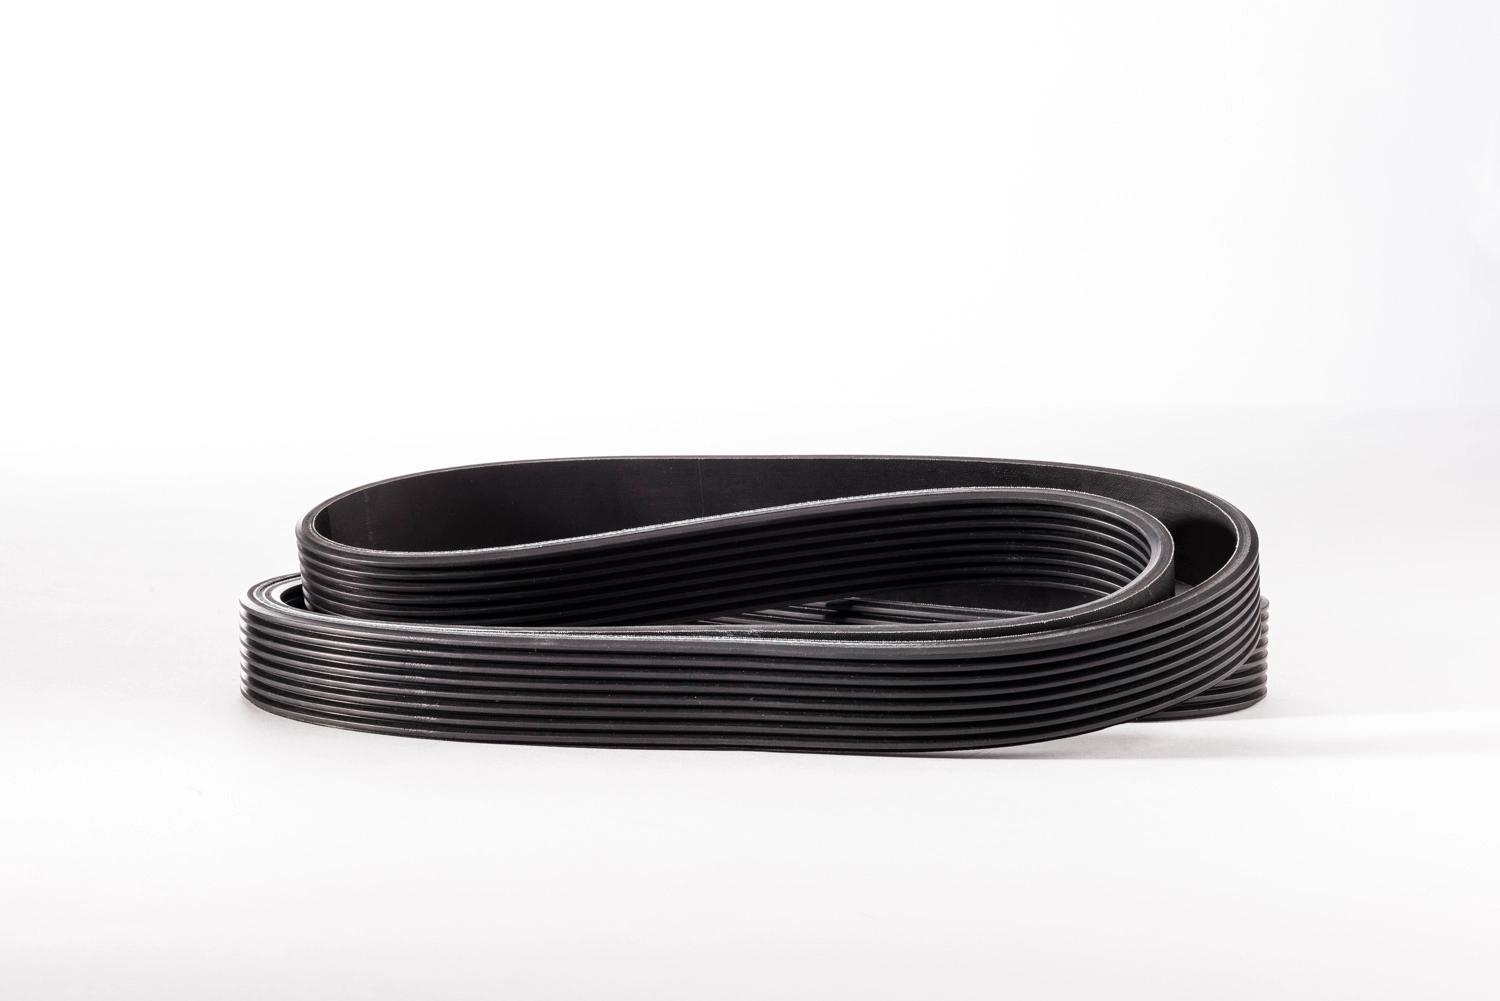 Gates 940M16/940M16 Industrial Micro-V® M-Section Belts, 940M16 MICRO-V 94 2388 28 95.42 2424 16 PM 5.92 150 41 0.49 12